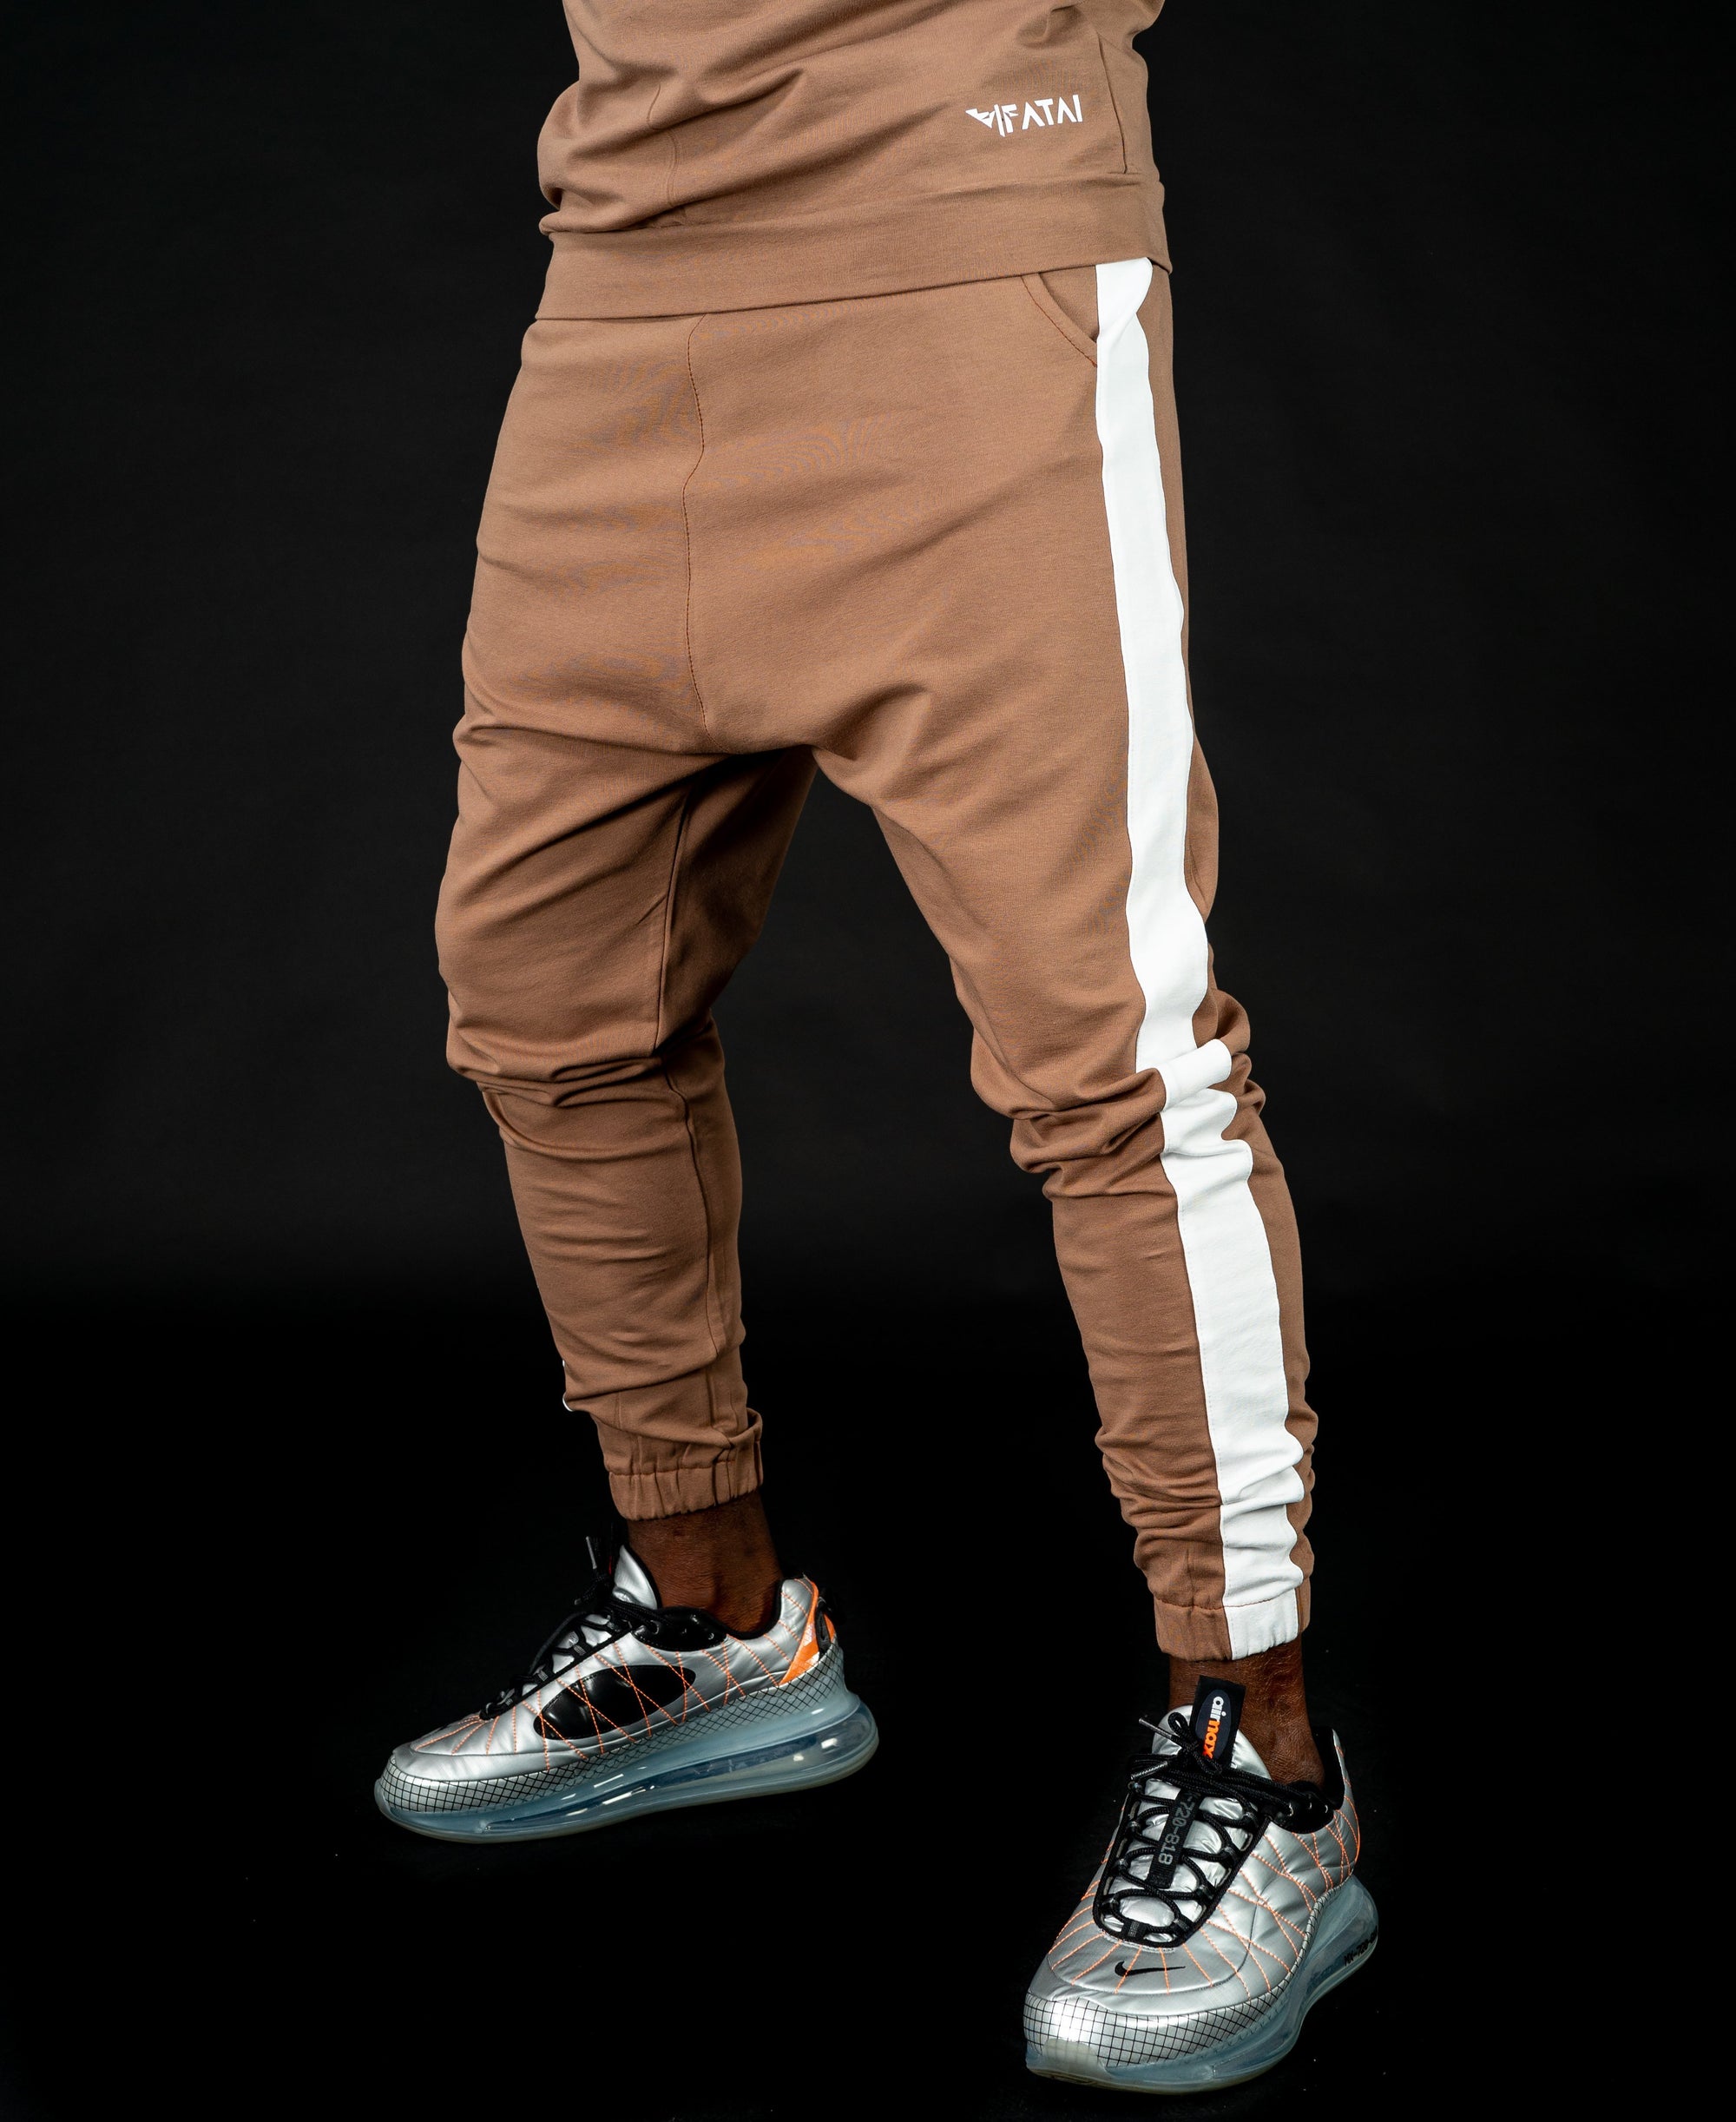 Brown trousers with white line - Fatai Style